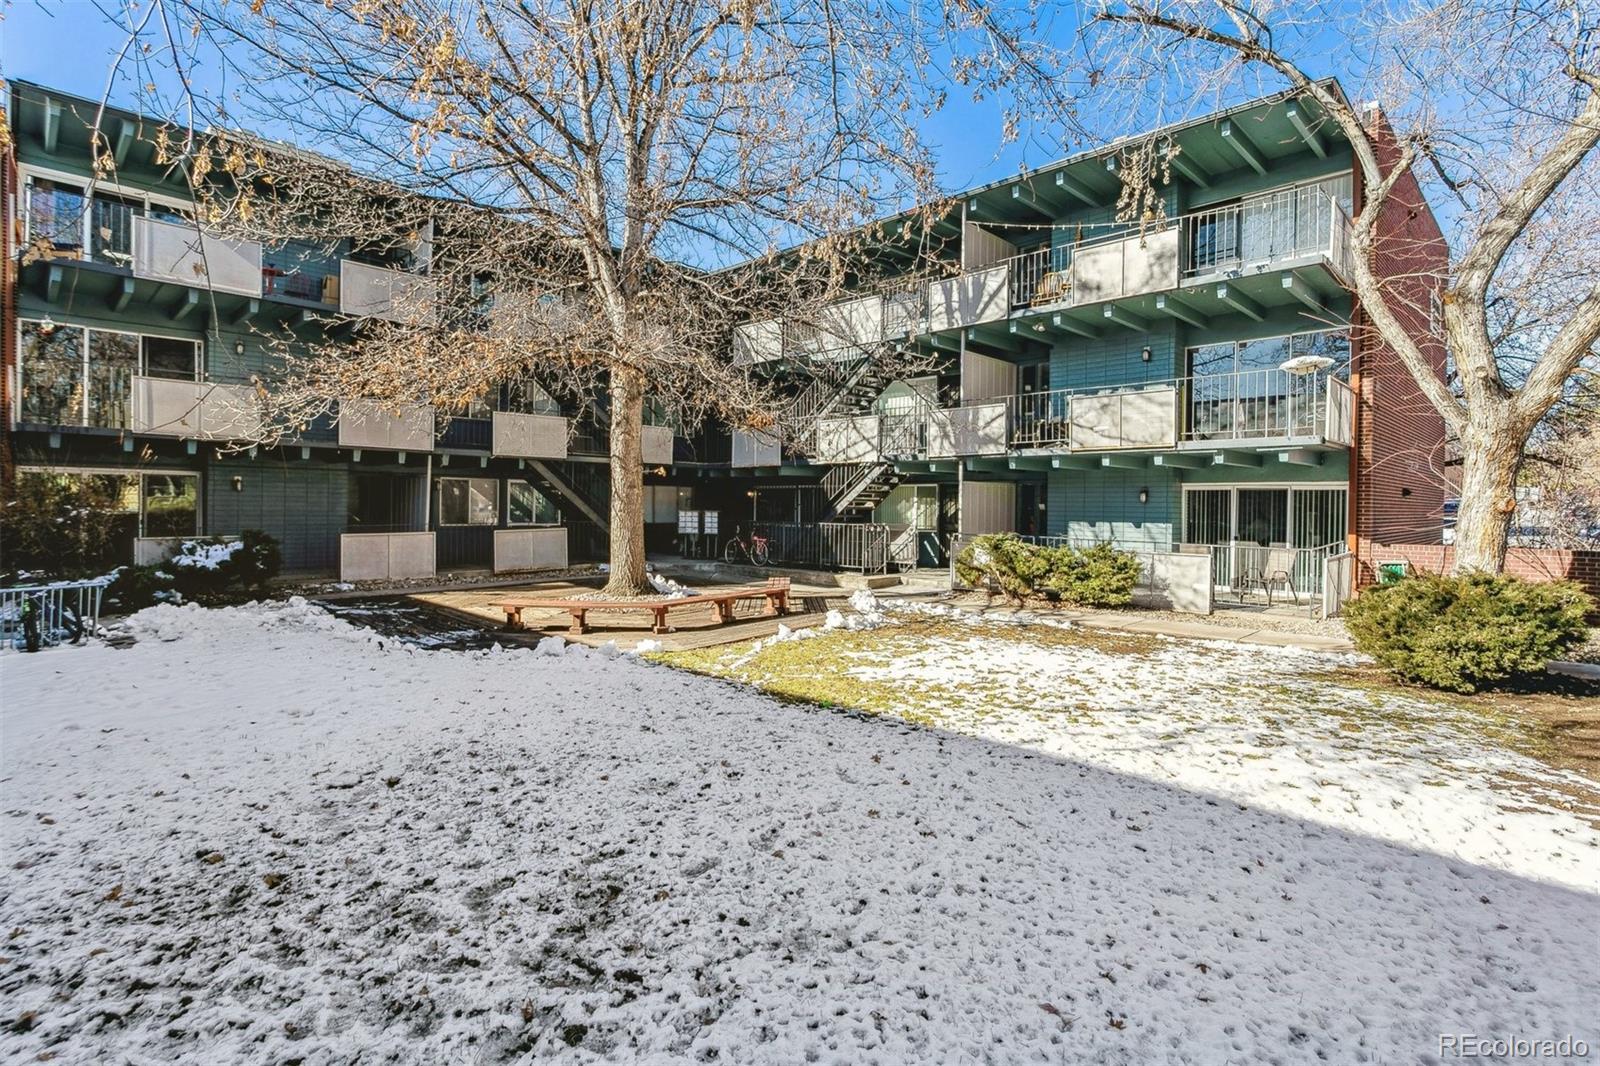 Photo one of 2401 S Gaylord St # 303 Denver CO 80210 | MLS 1675819